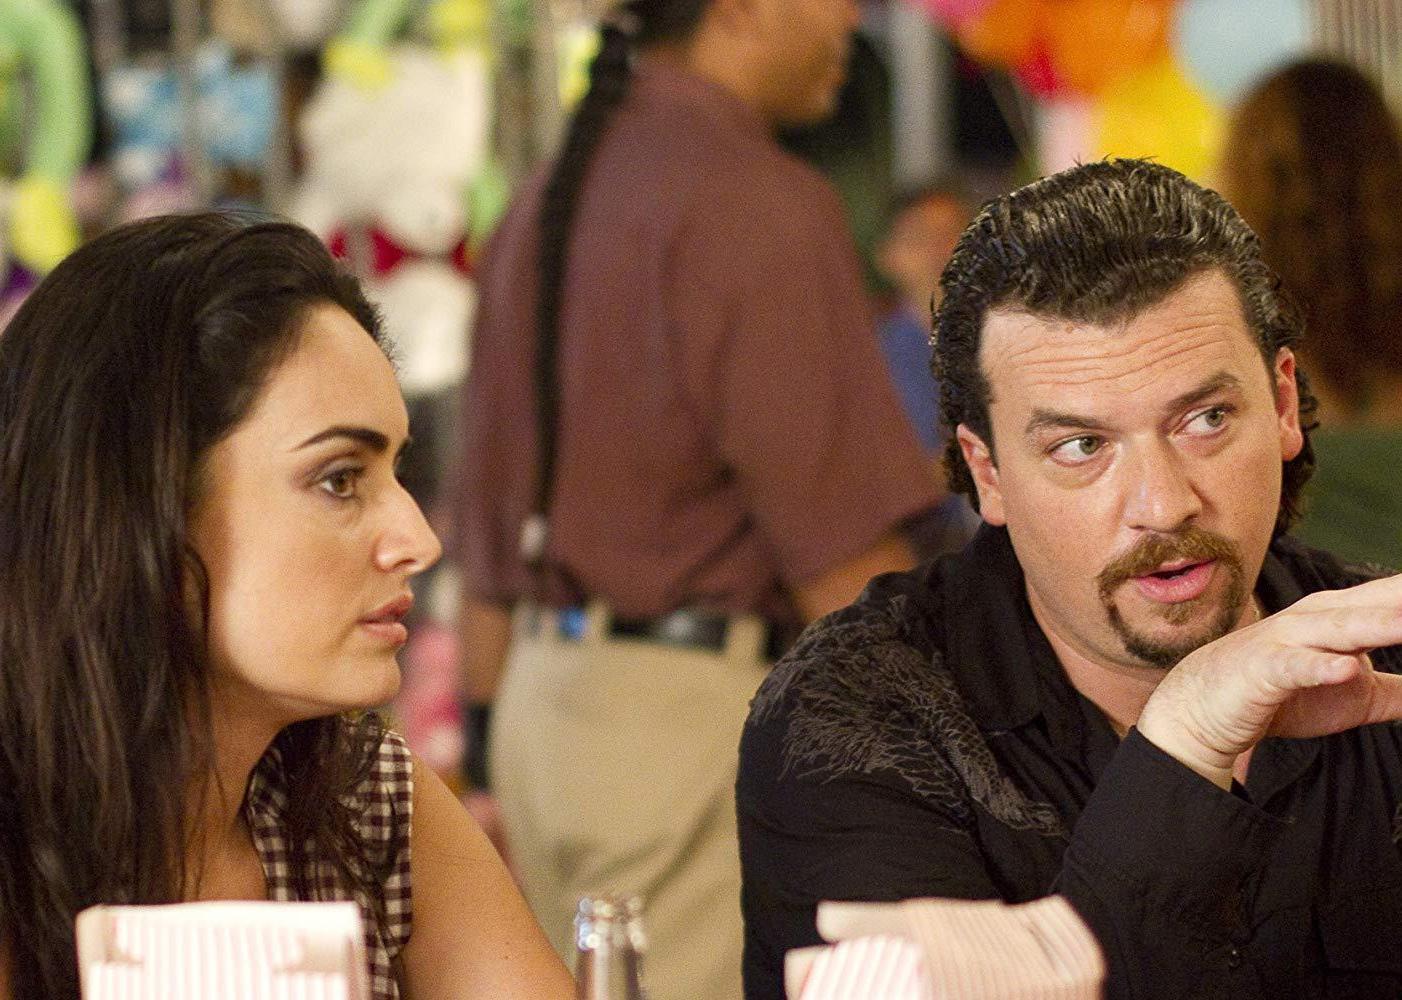 Actors in an episode of ‘Eastbound & Down’.